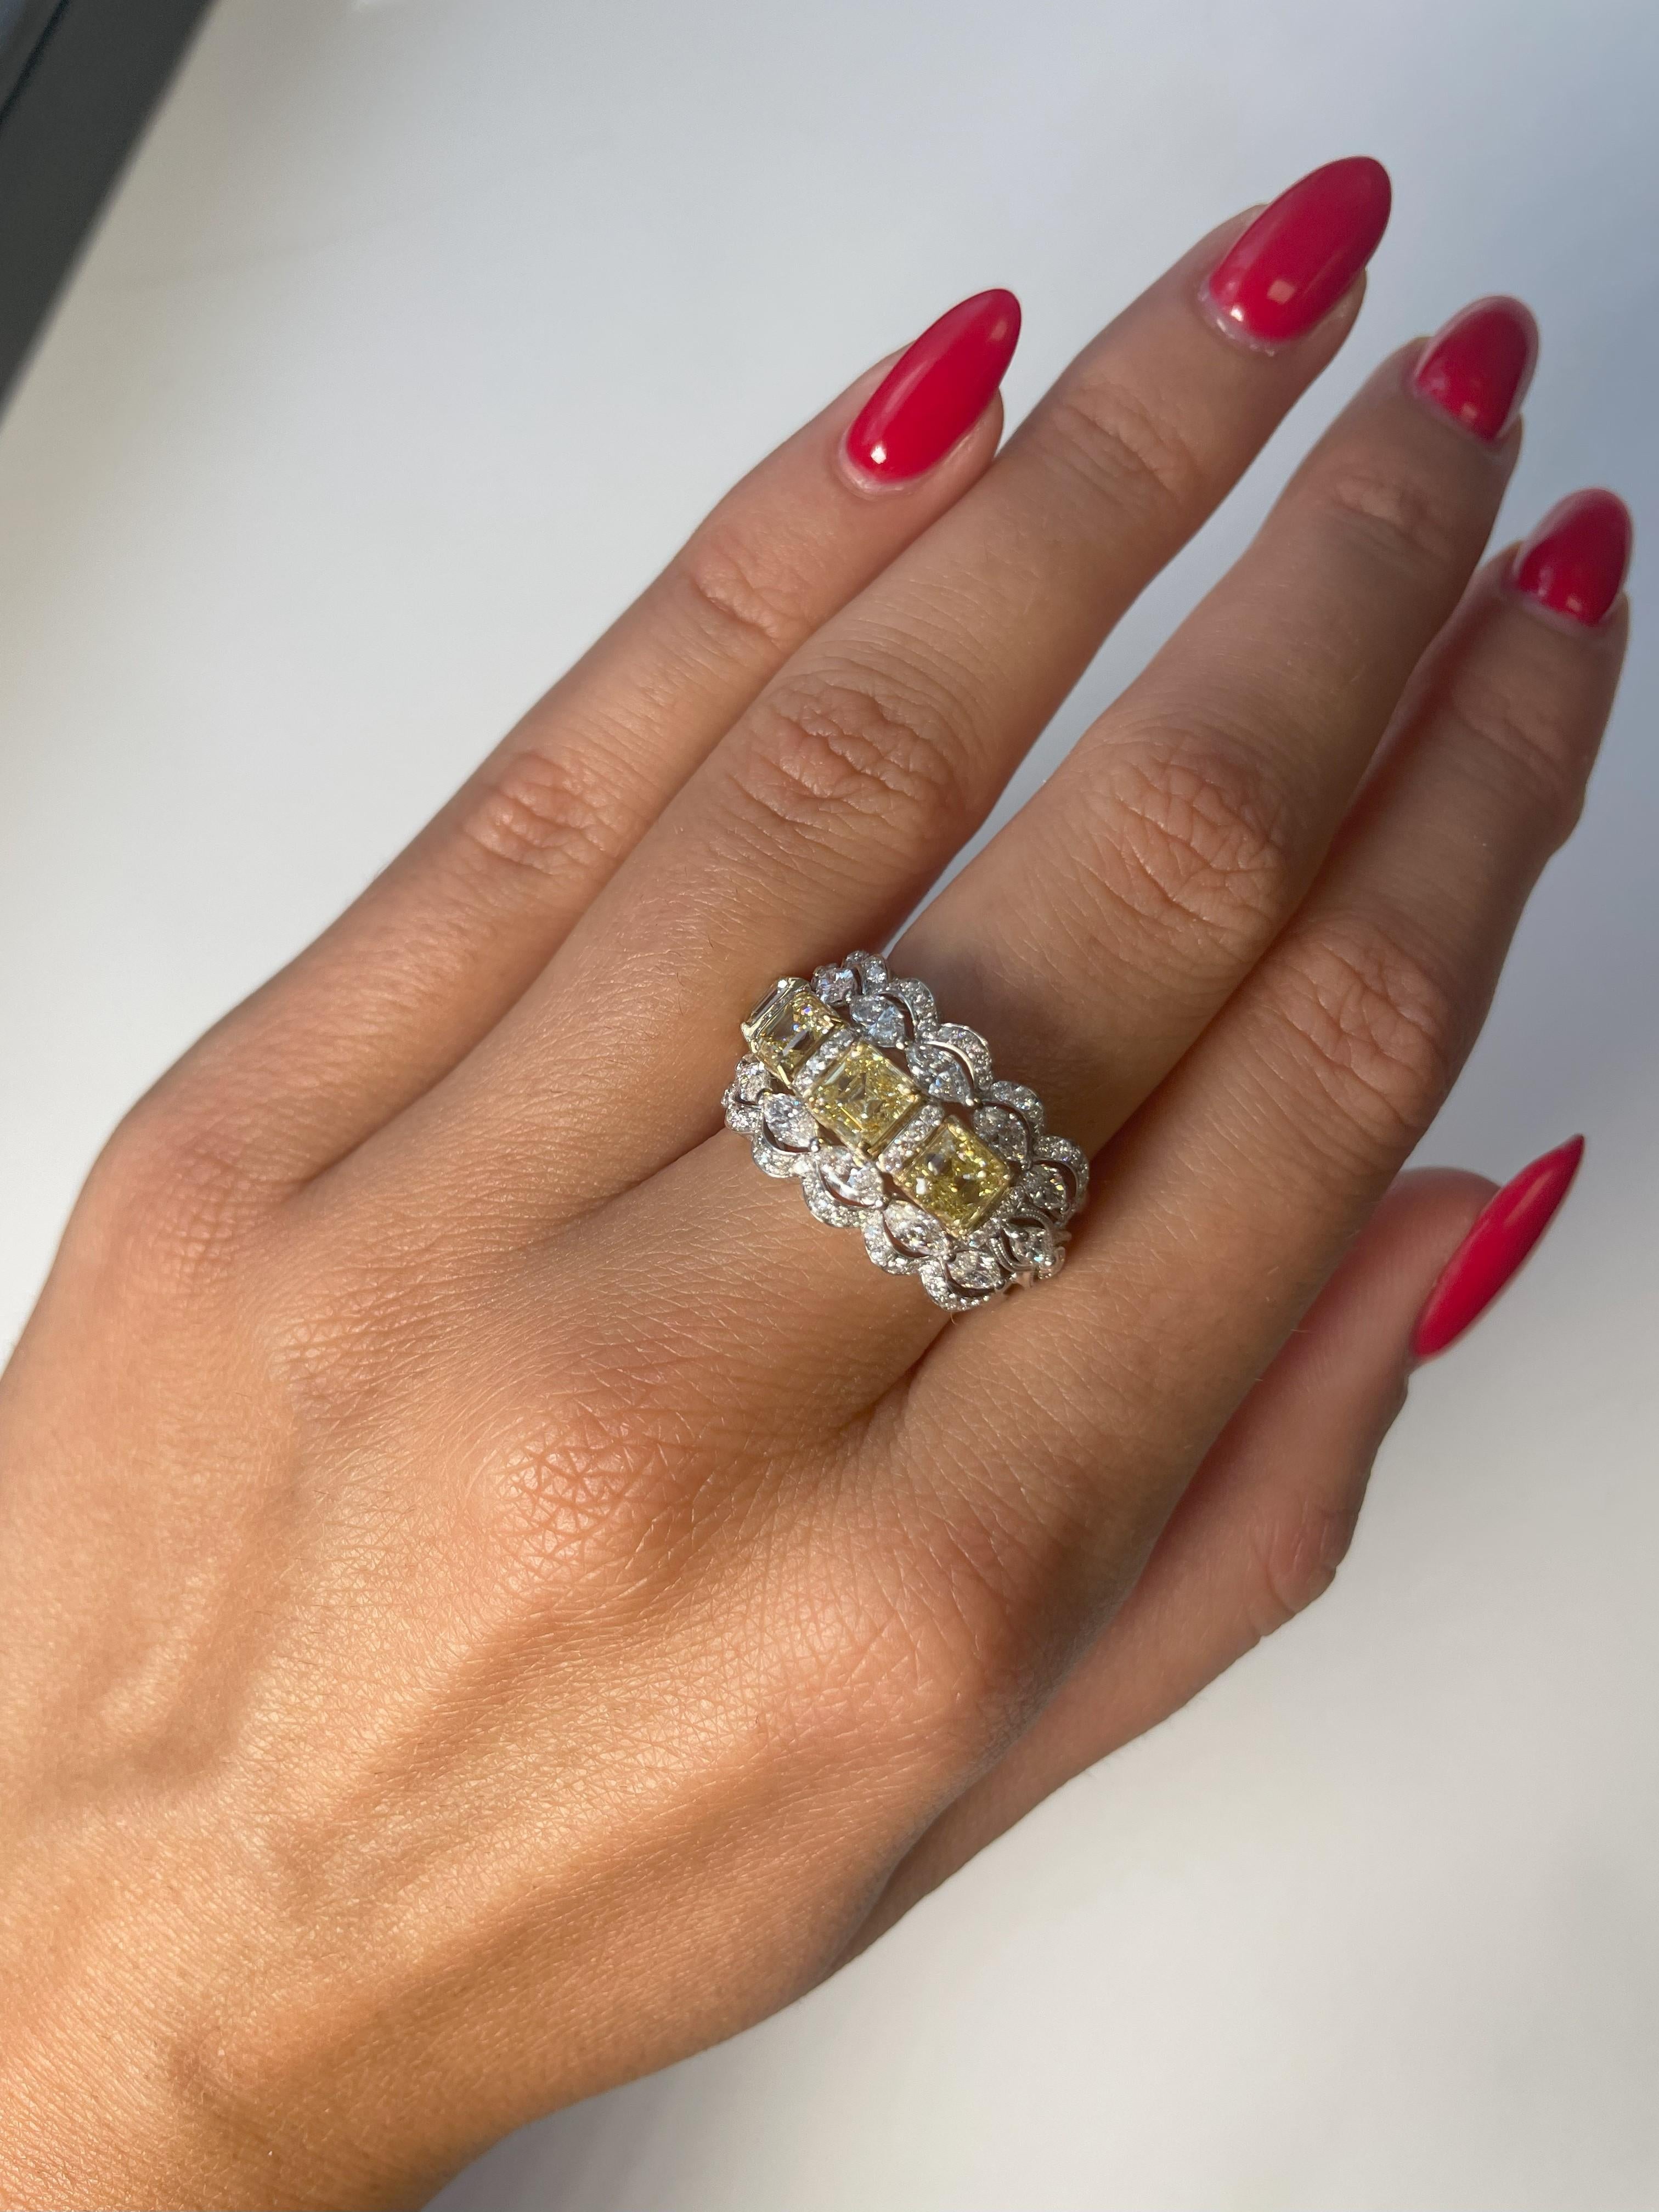 Introducing a stunning and elegant wedding band design featuring a stunning row of four perfectly matched Fancy Yellow diamonds Asscher-cut, with a combined weight of 2.67 carats. This centerpiece is elegantly encircled by two rows of marquise-cut